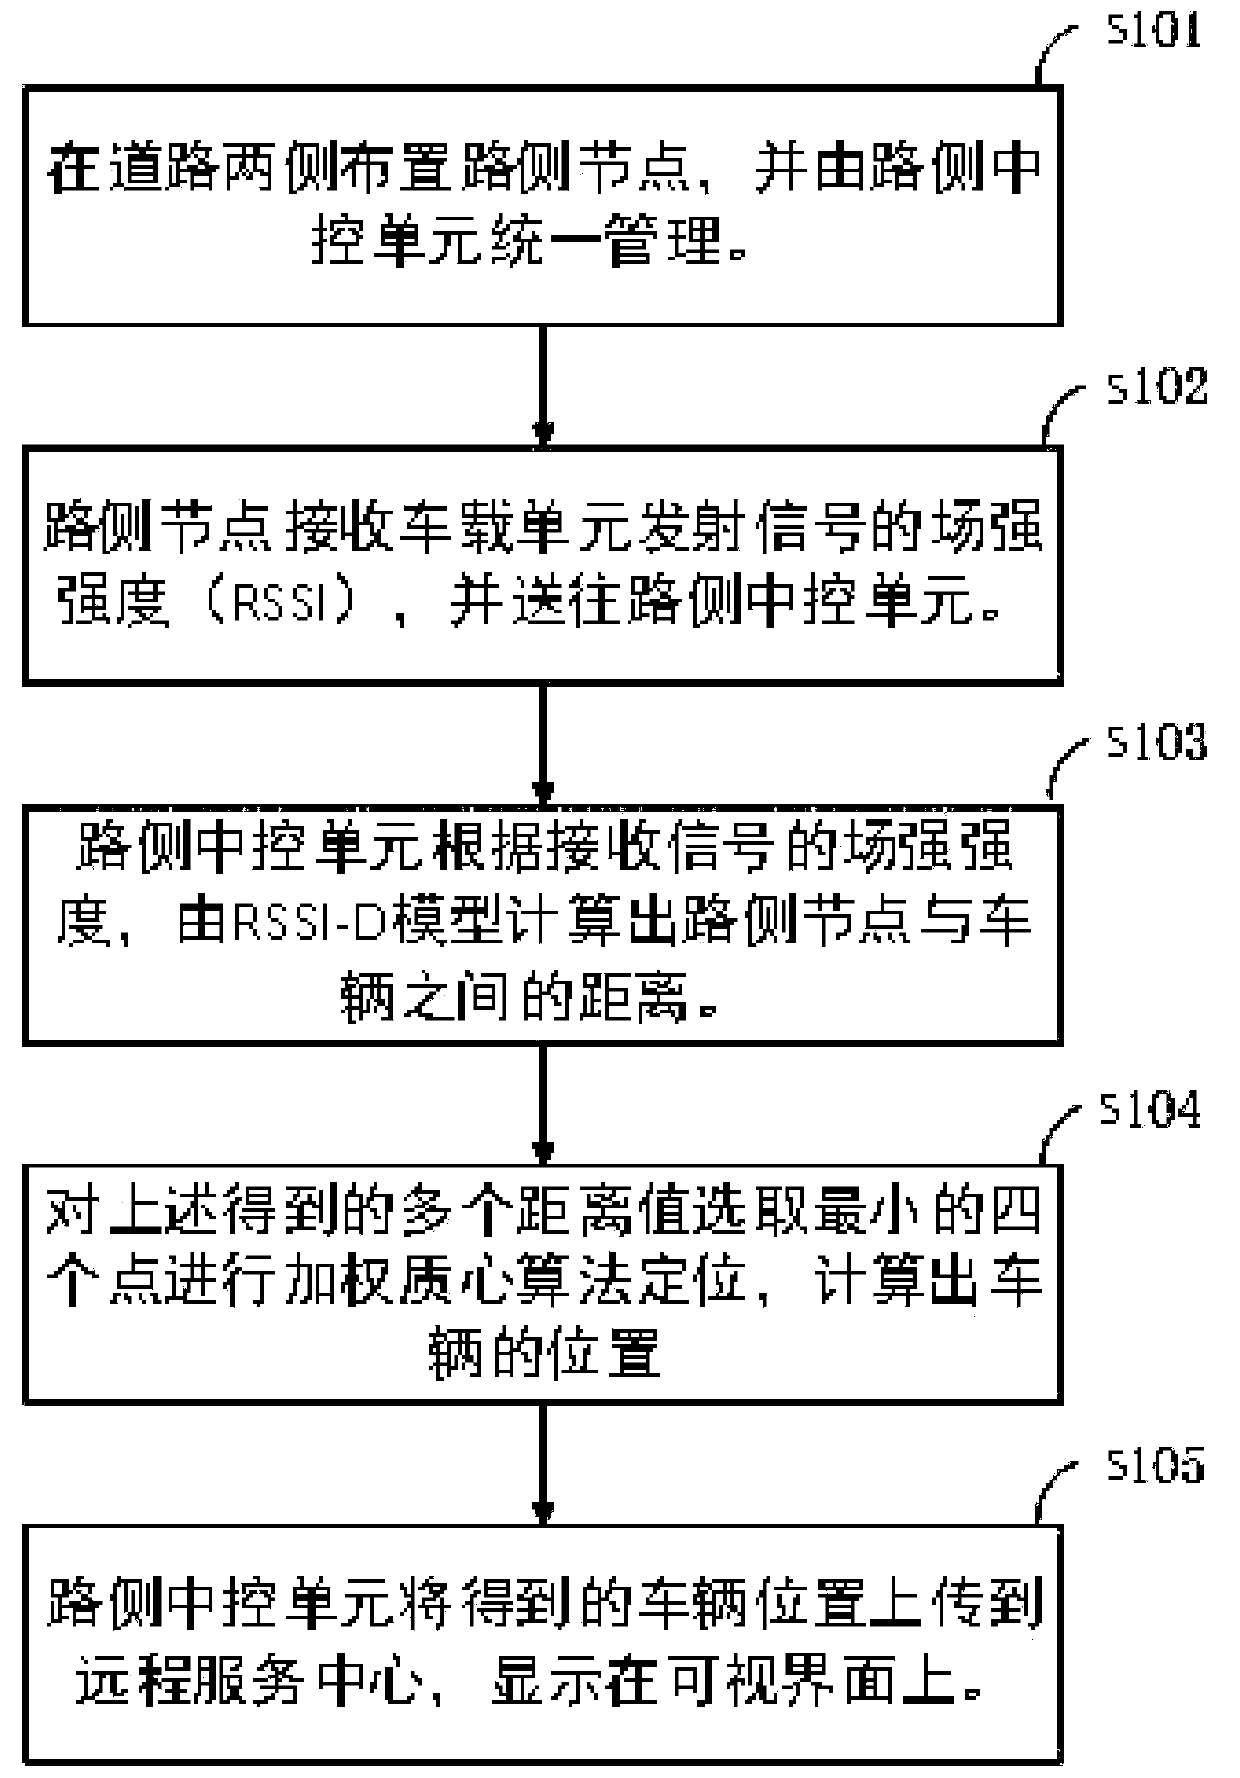 A vehicle-road cooperation-based tracking and positioning system and a tracking and positioning method for vehicles in a tunnel